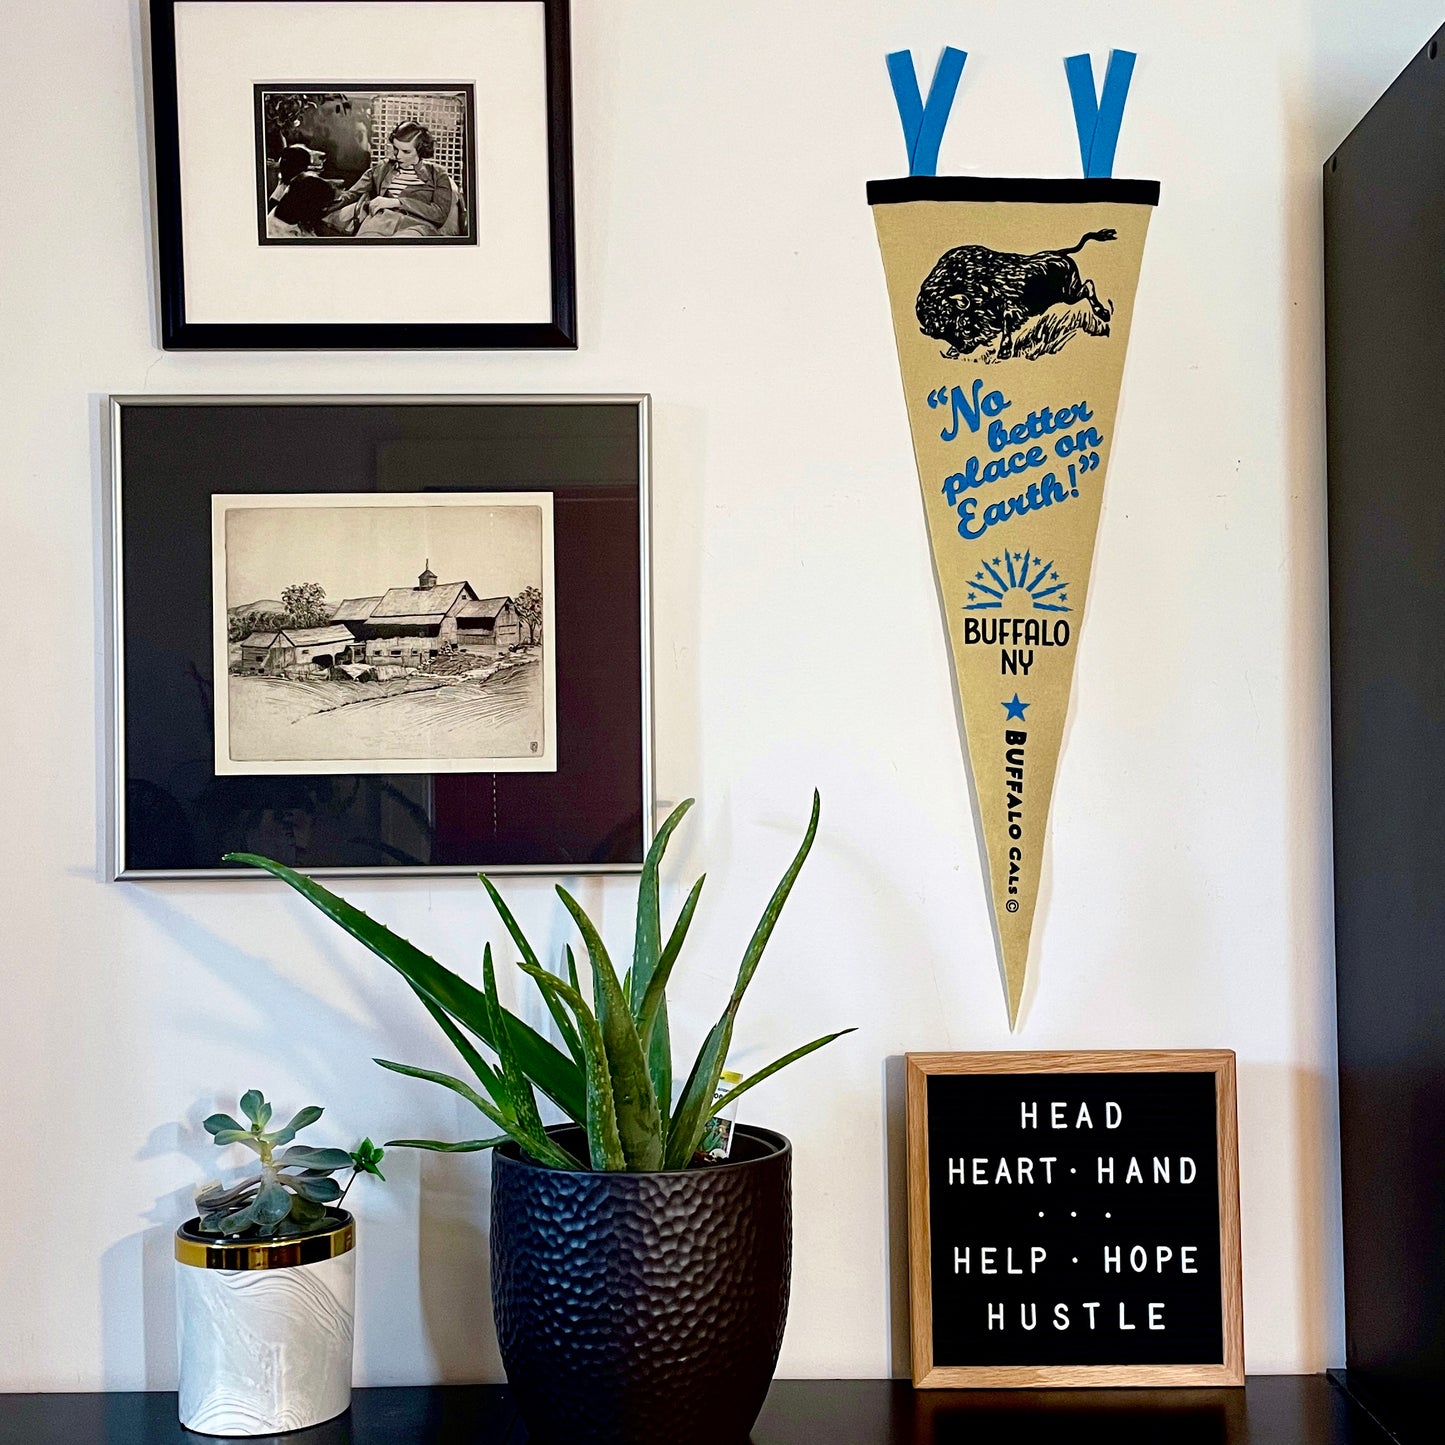 “Buffalo: No Better Place on Earth!™” pennant